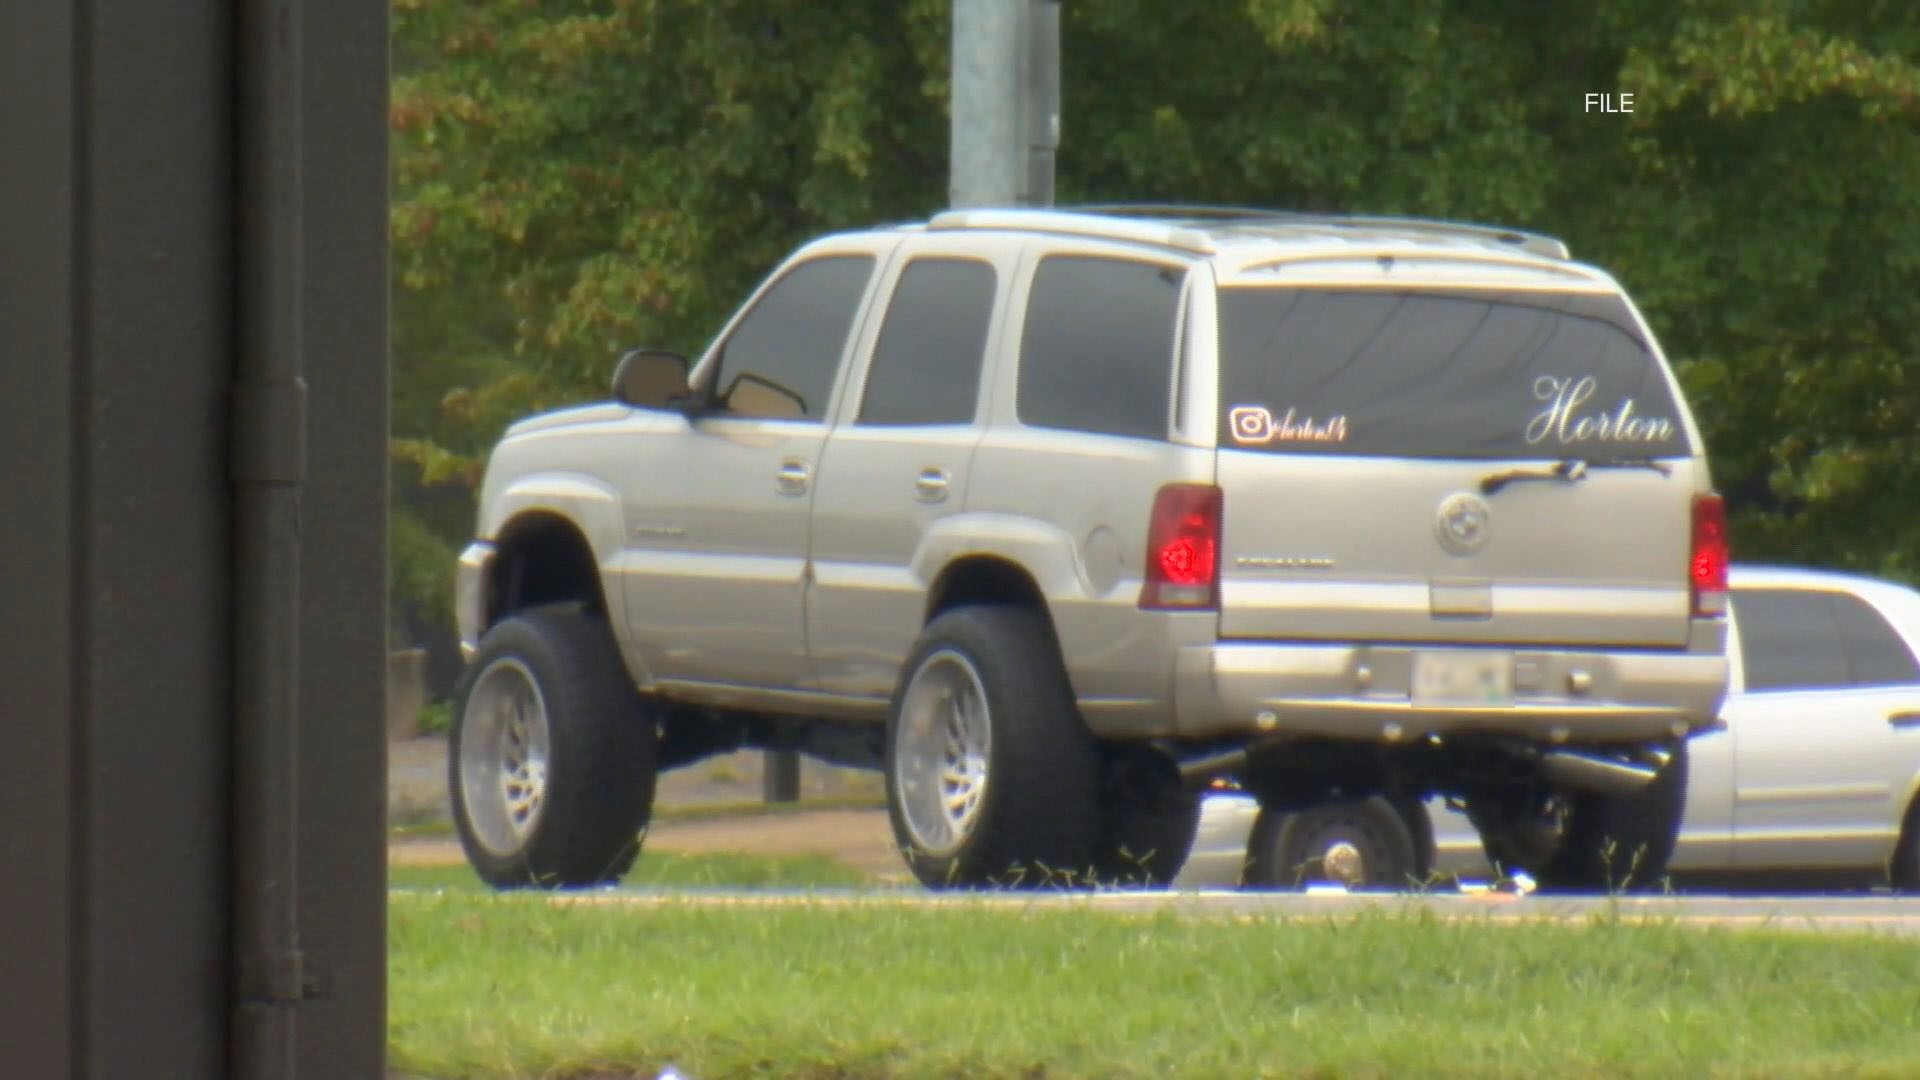 A popular modification on trucks and SUVs has been banned by the governor.